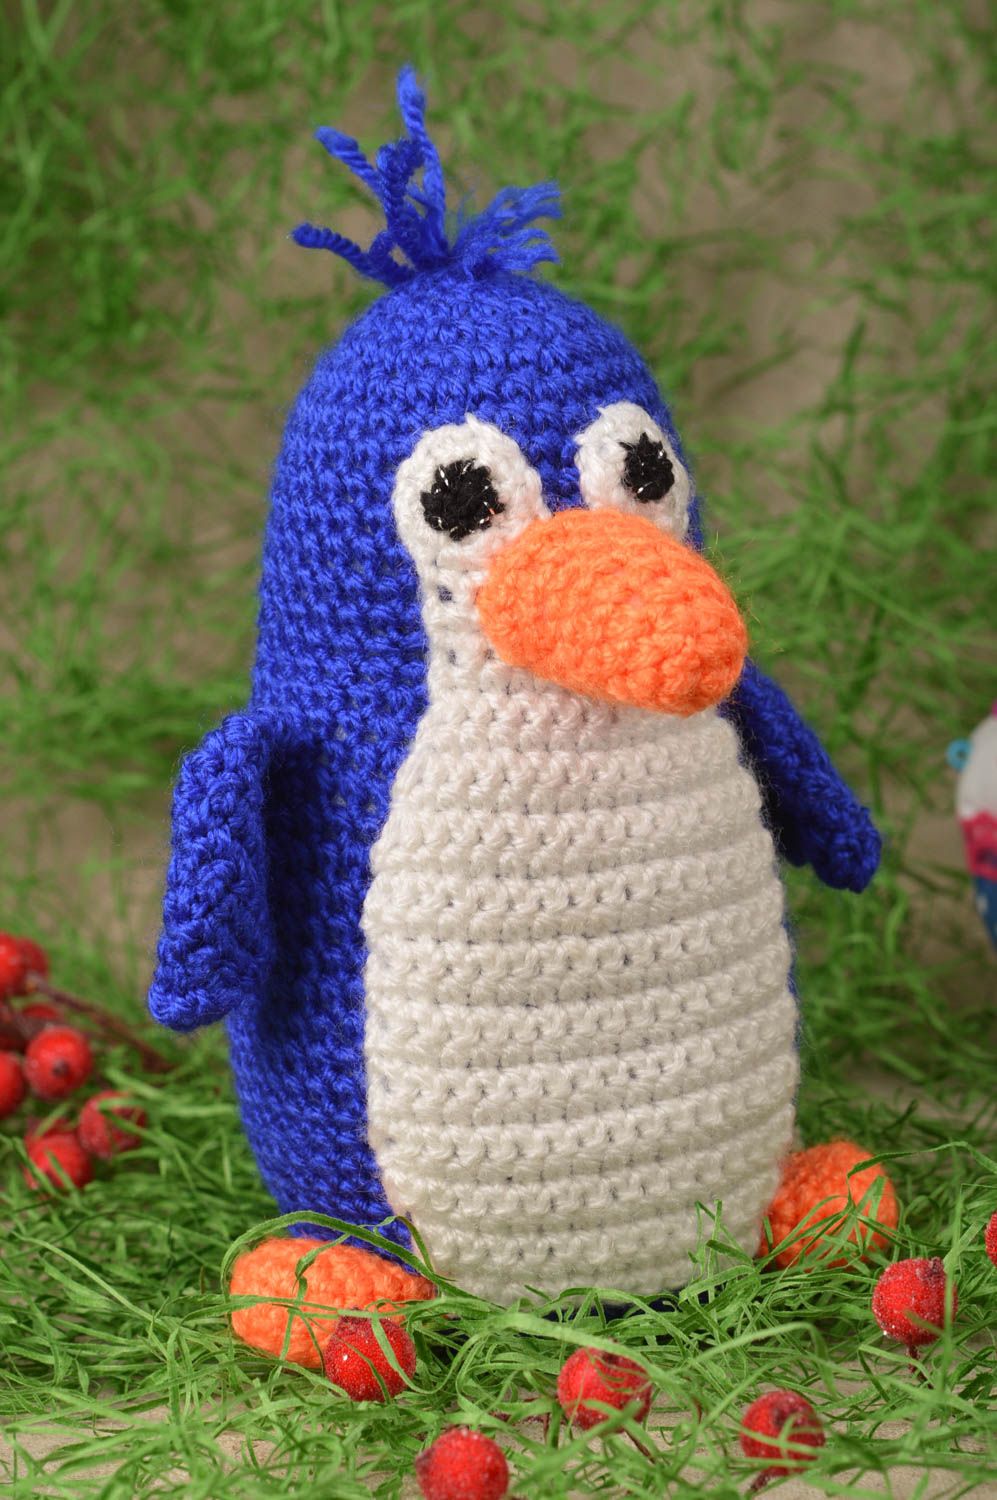 Handmade toy crocheted toy designer toy gift ideas toy for baby decor ideas photo 1